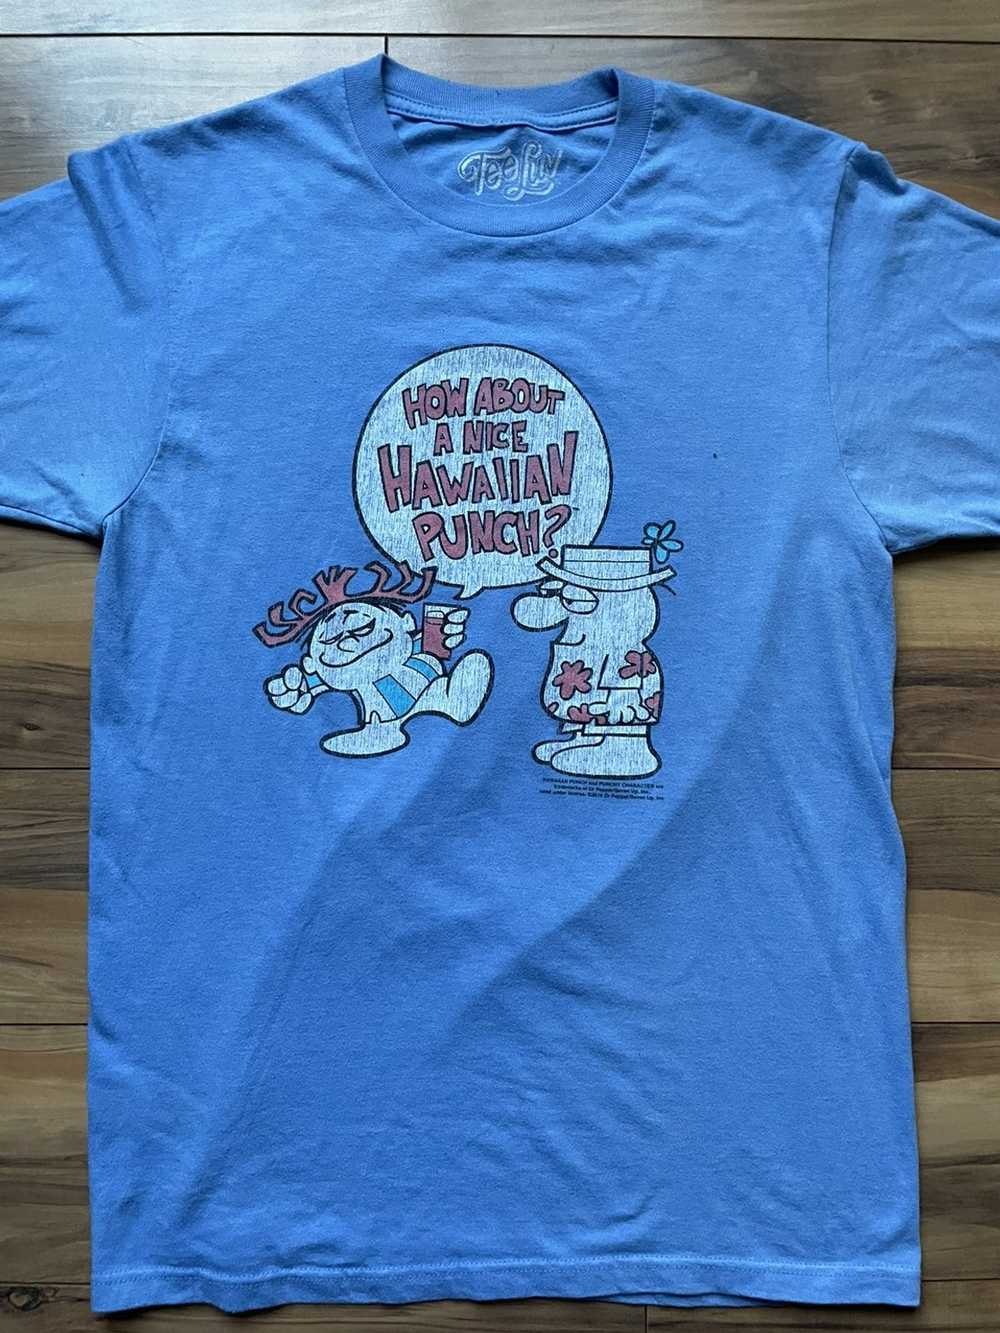 Vintage How about a nice Hawaiian Punch tshirt - image 2